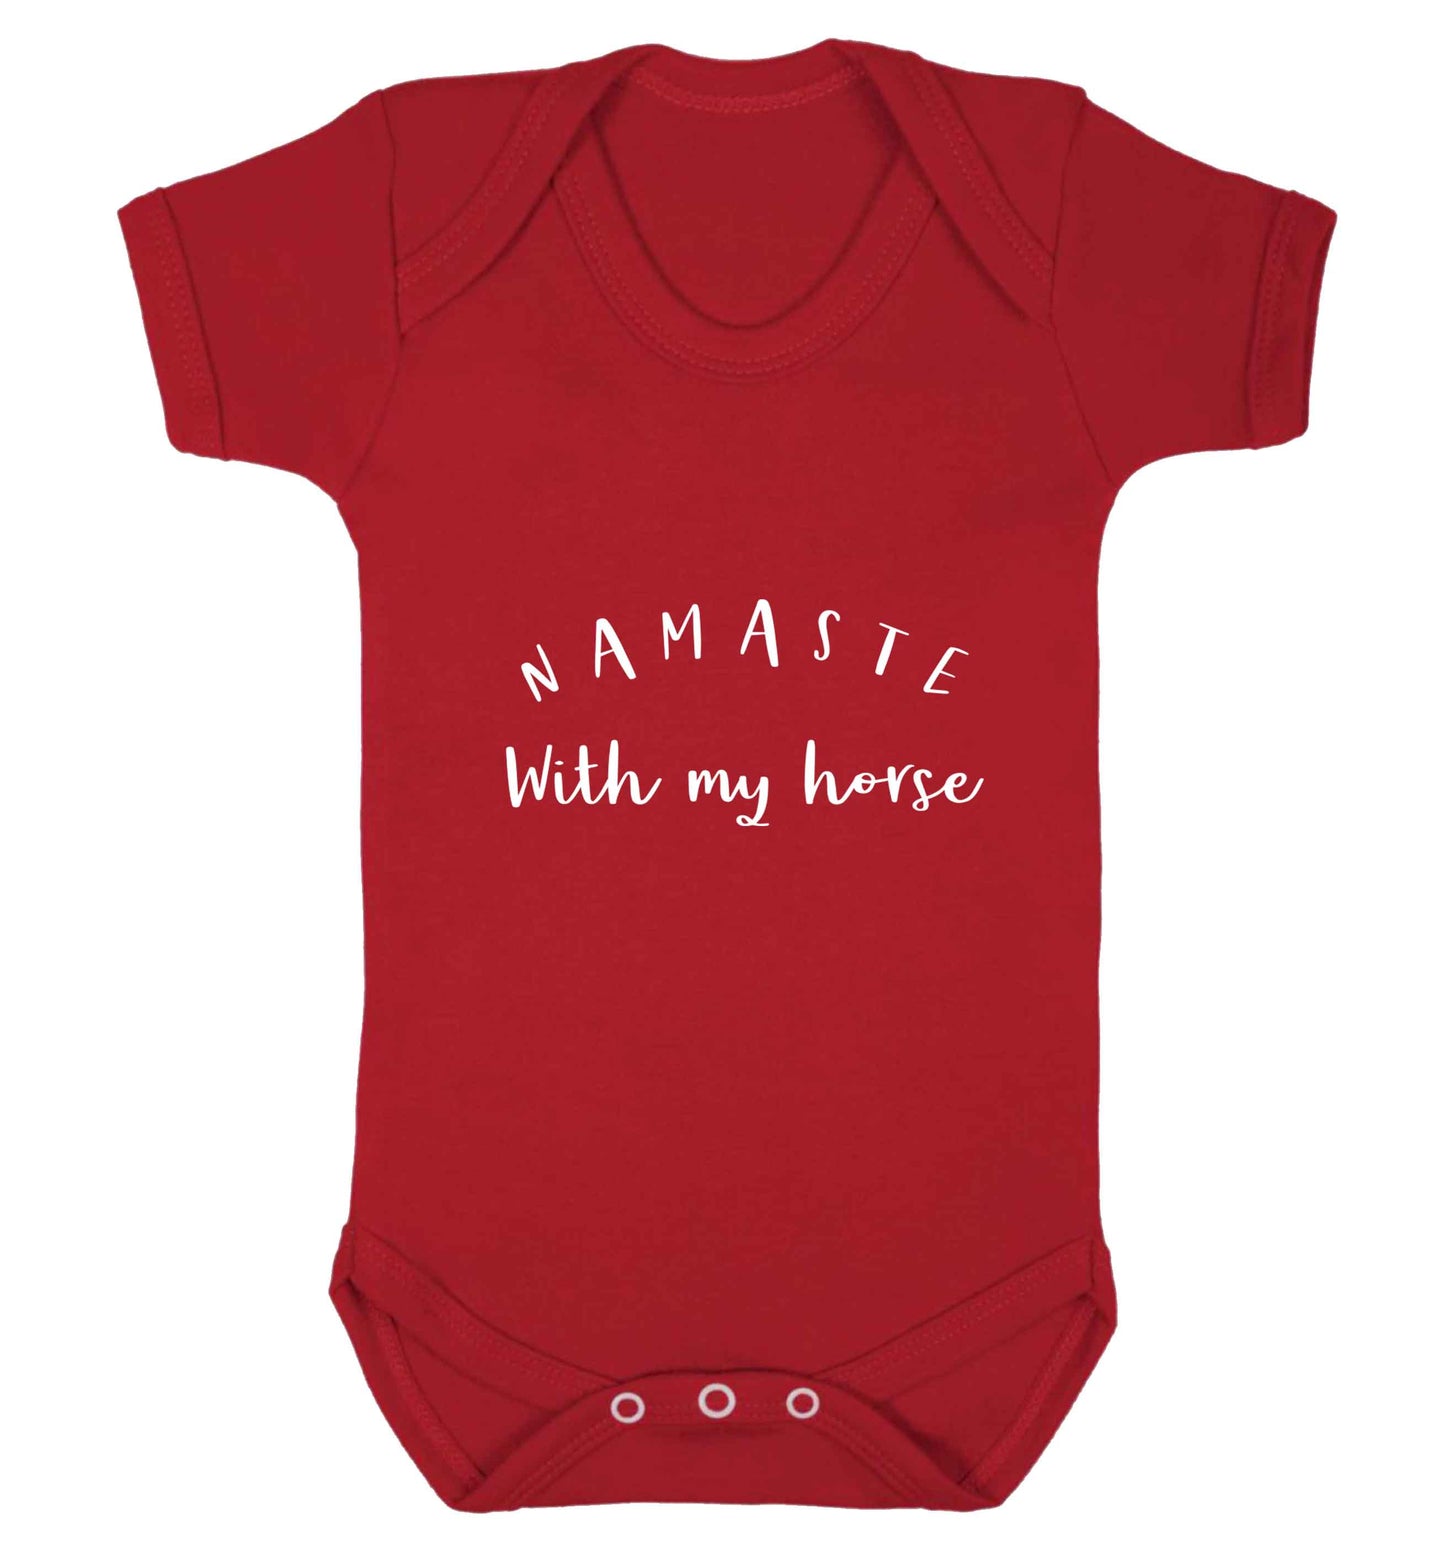 Namaste with my horse baby vest red 18-24 months